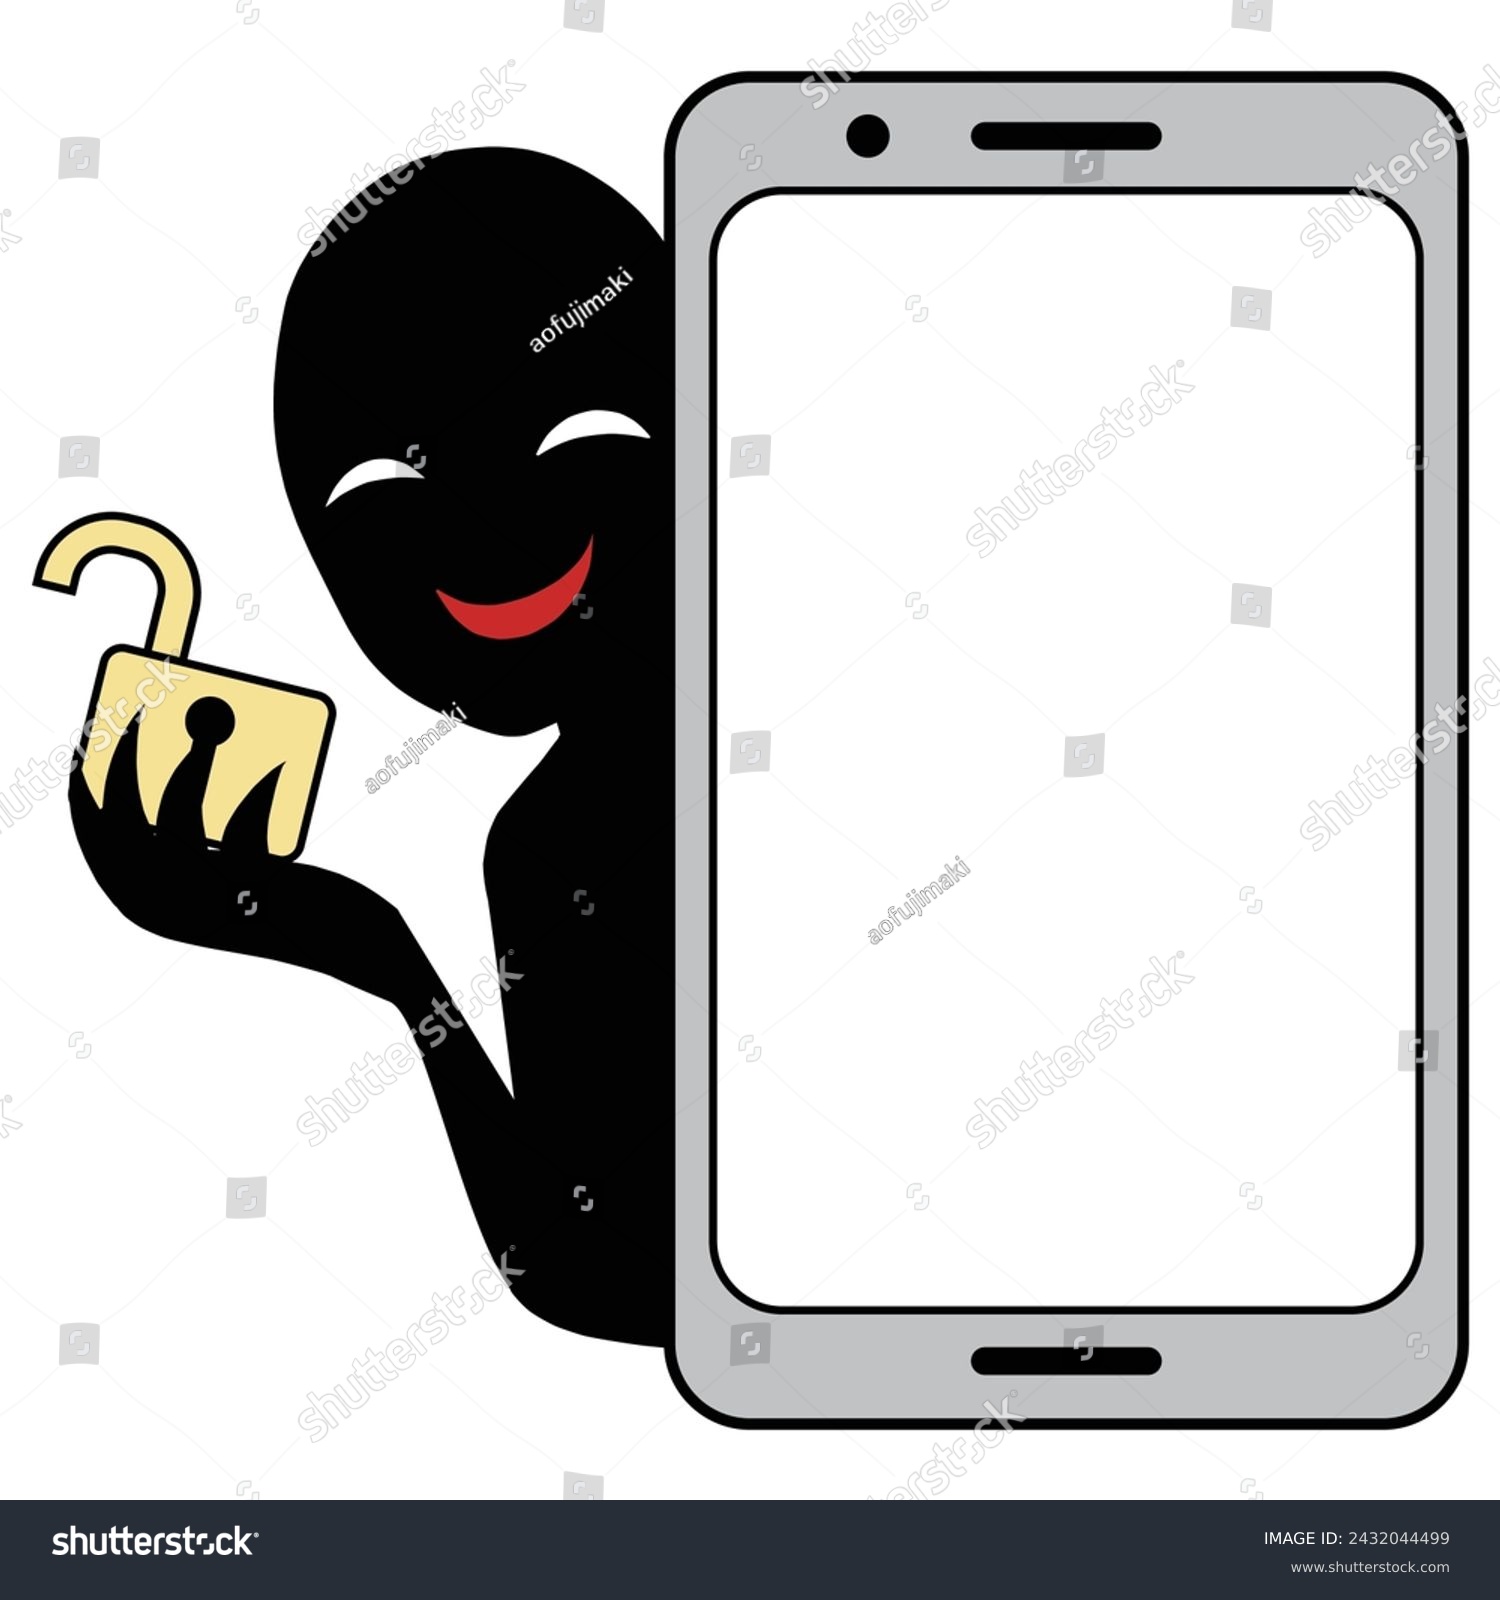 SVG of Materials for images of unsecured smartphones and bad guys svg